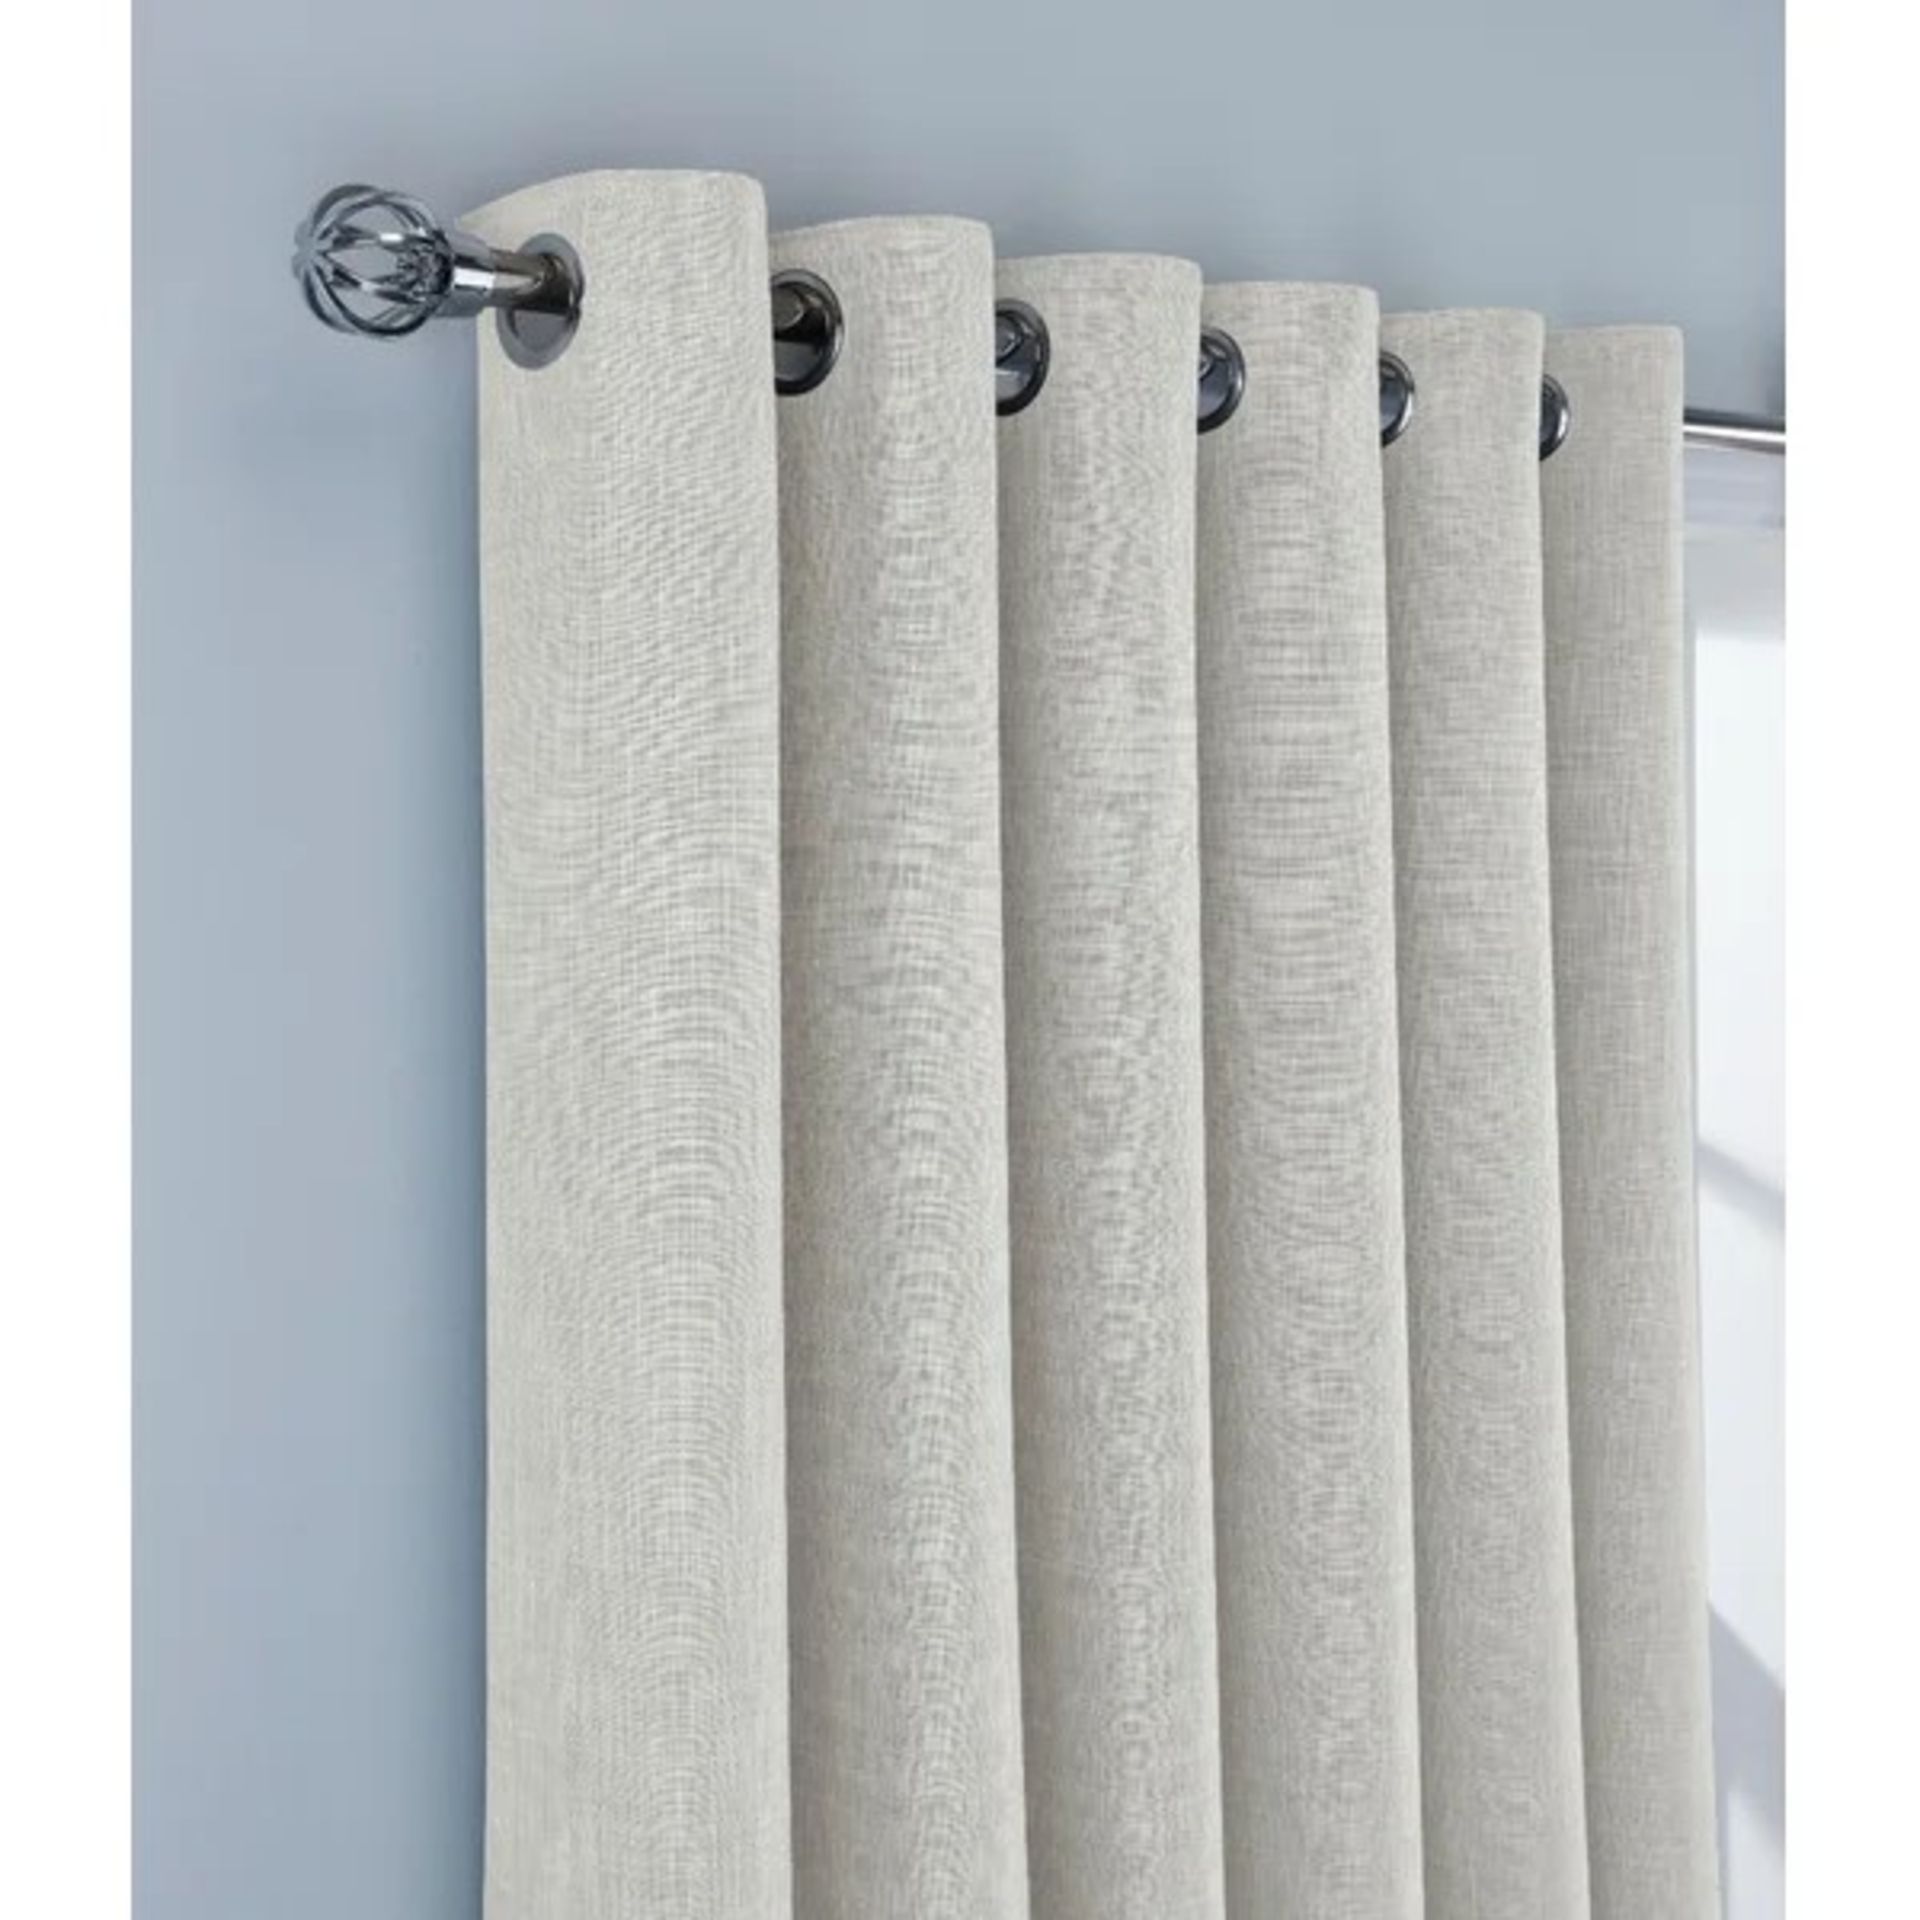 RRP £55.99 - Bittar Linen Look Eyelet Blackout Curtains (x 1 pair)- Colour: Cream, Panel Size: 117 W - Image 2 of 2